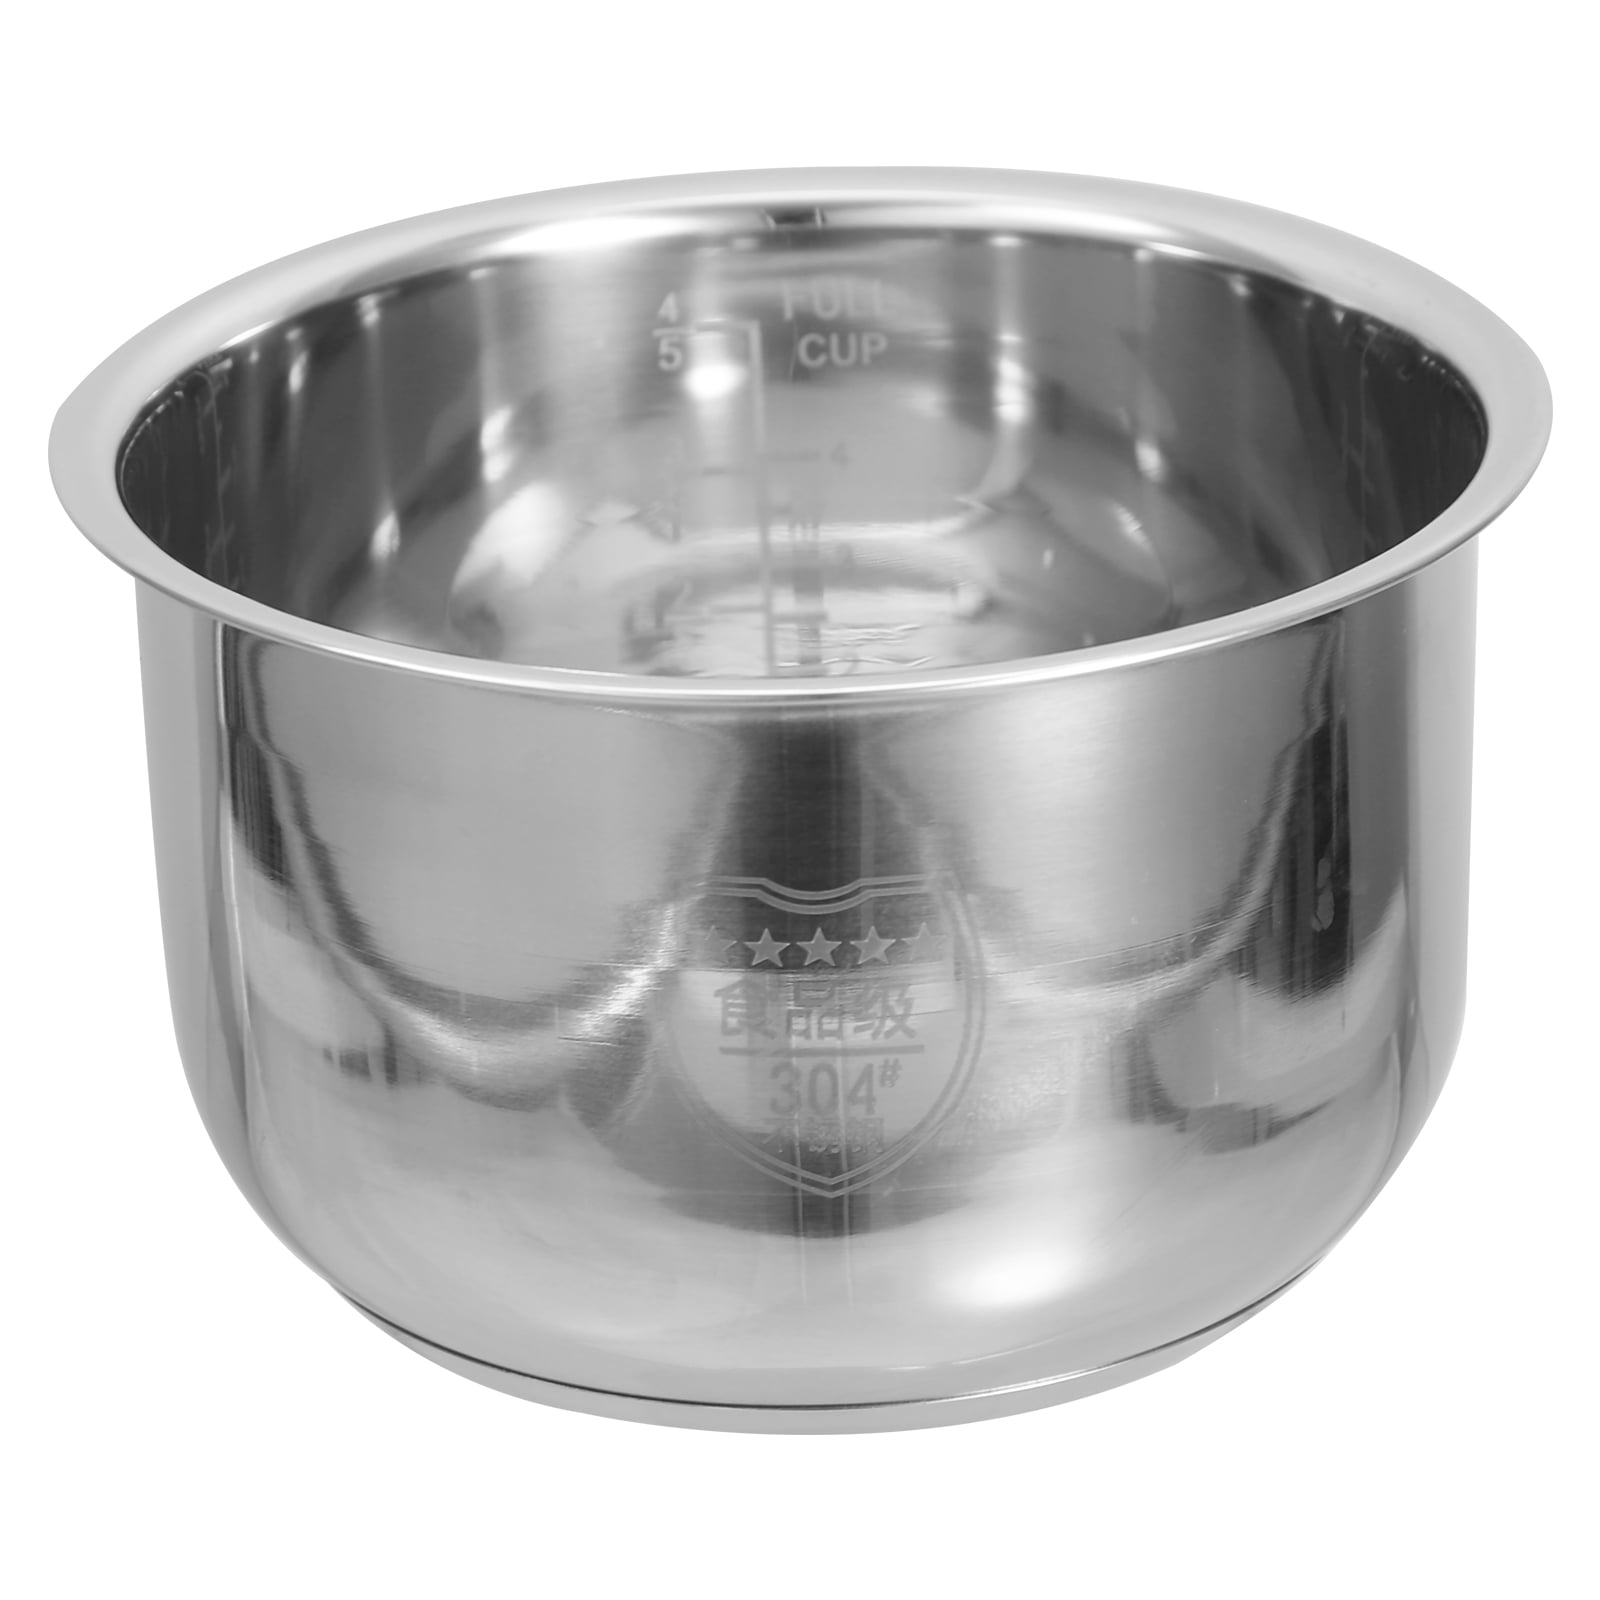 top quality stainless steel inner pot